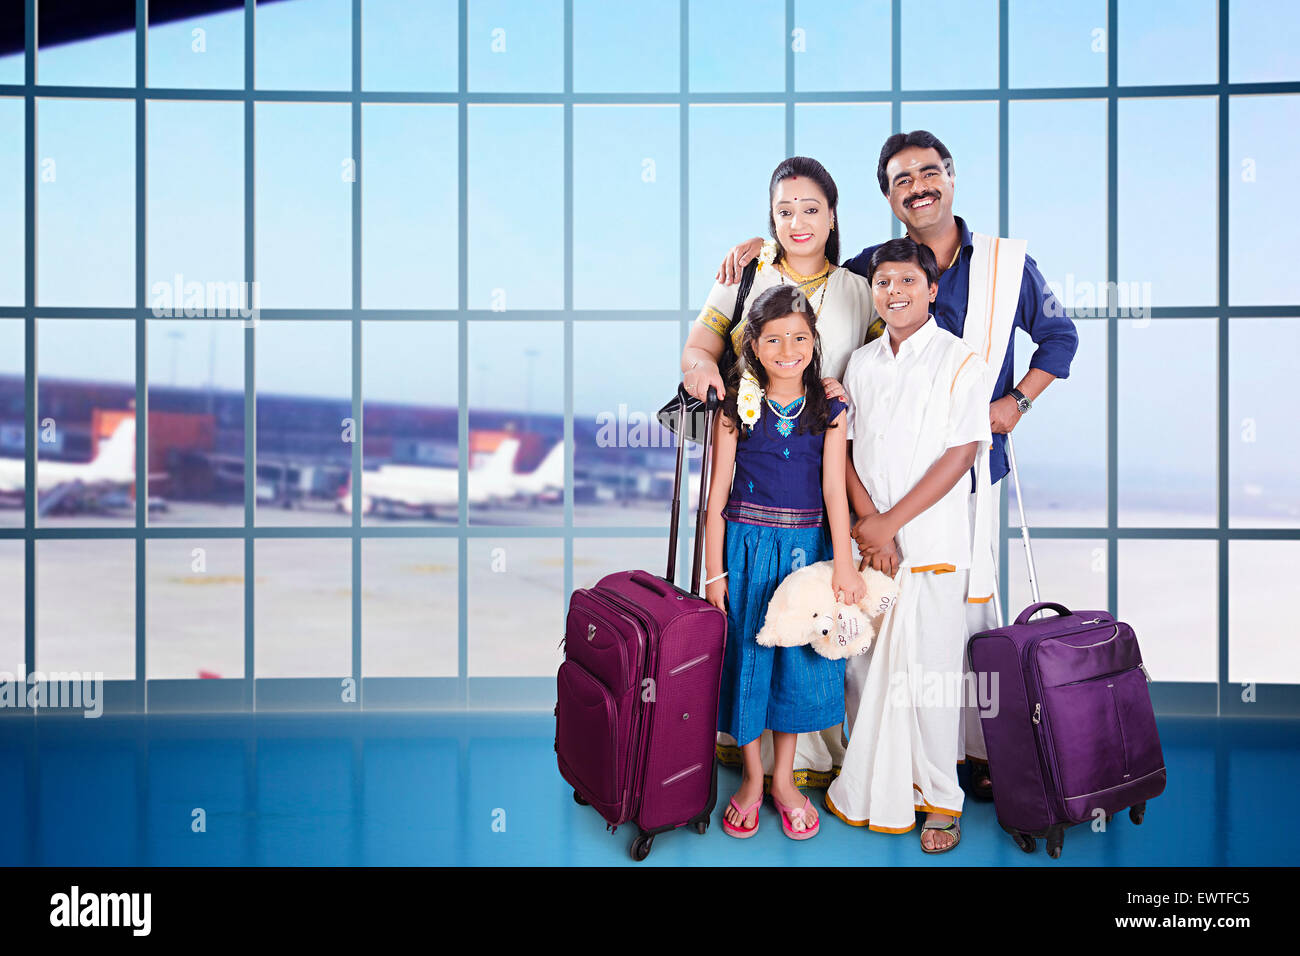 South Indian Parents and kids Passenger happy Journey Stock Photo ...